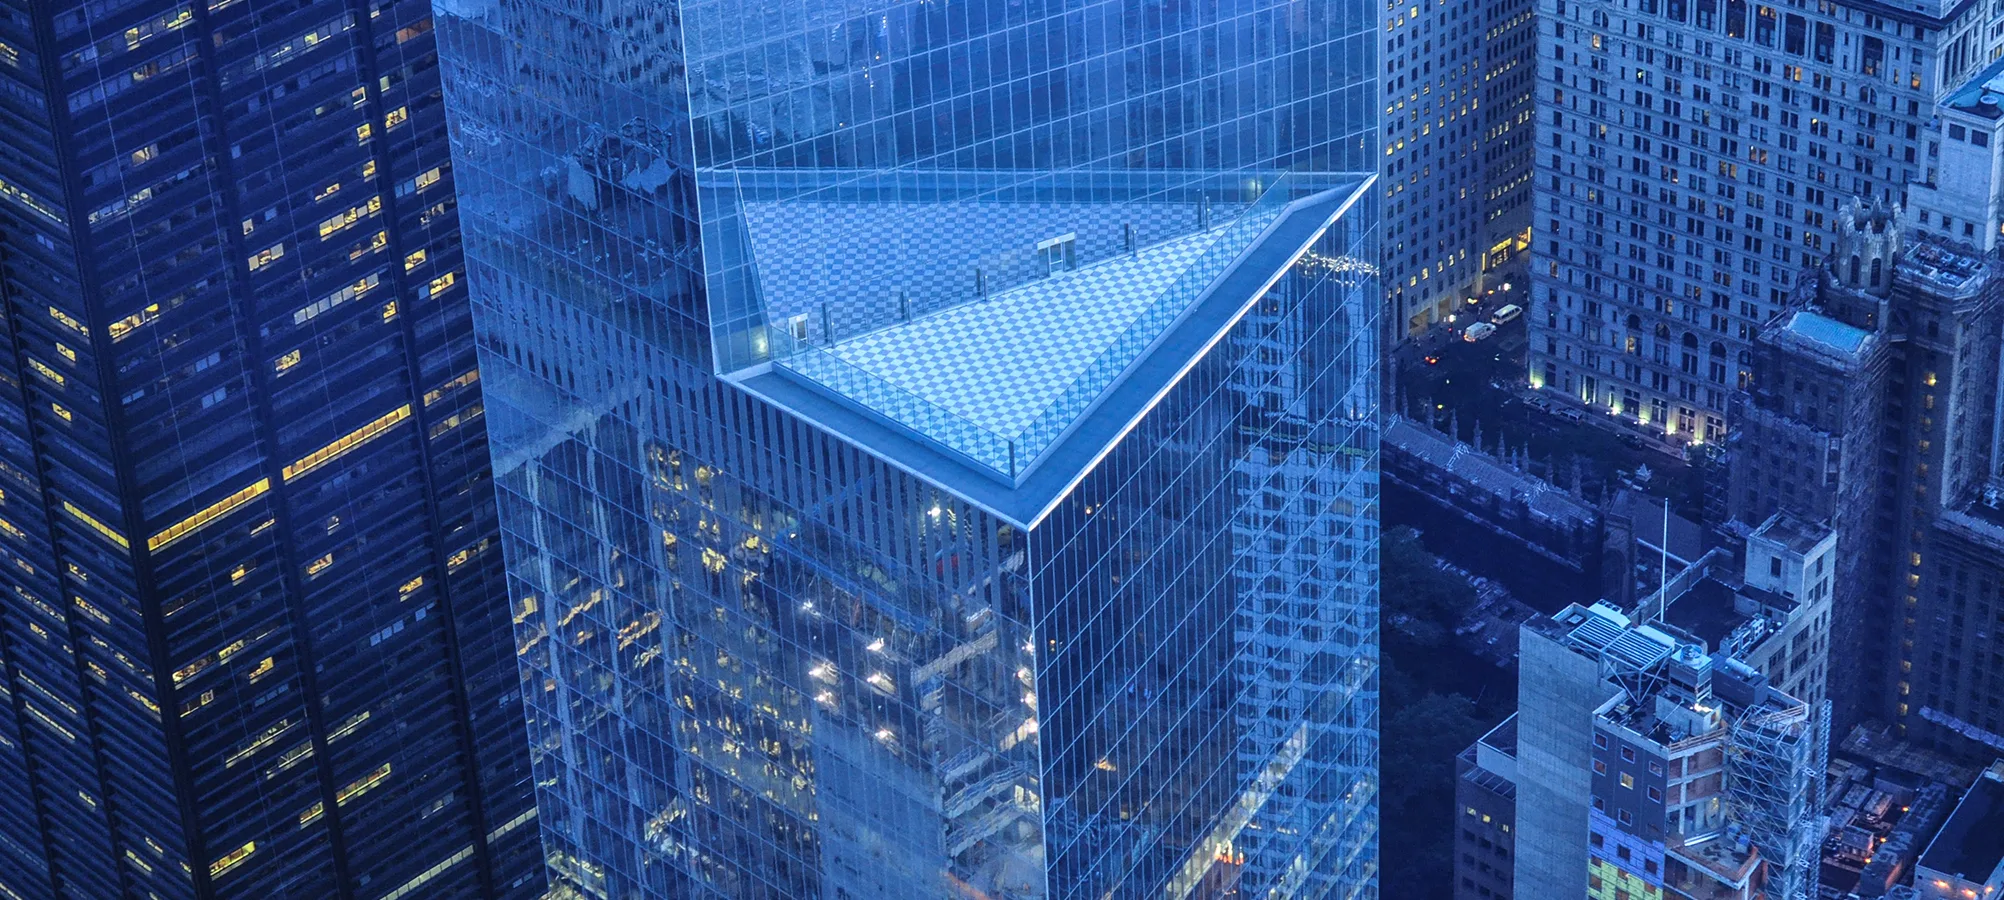 birds eye view of tall glass office buildings at night